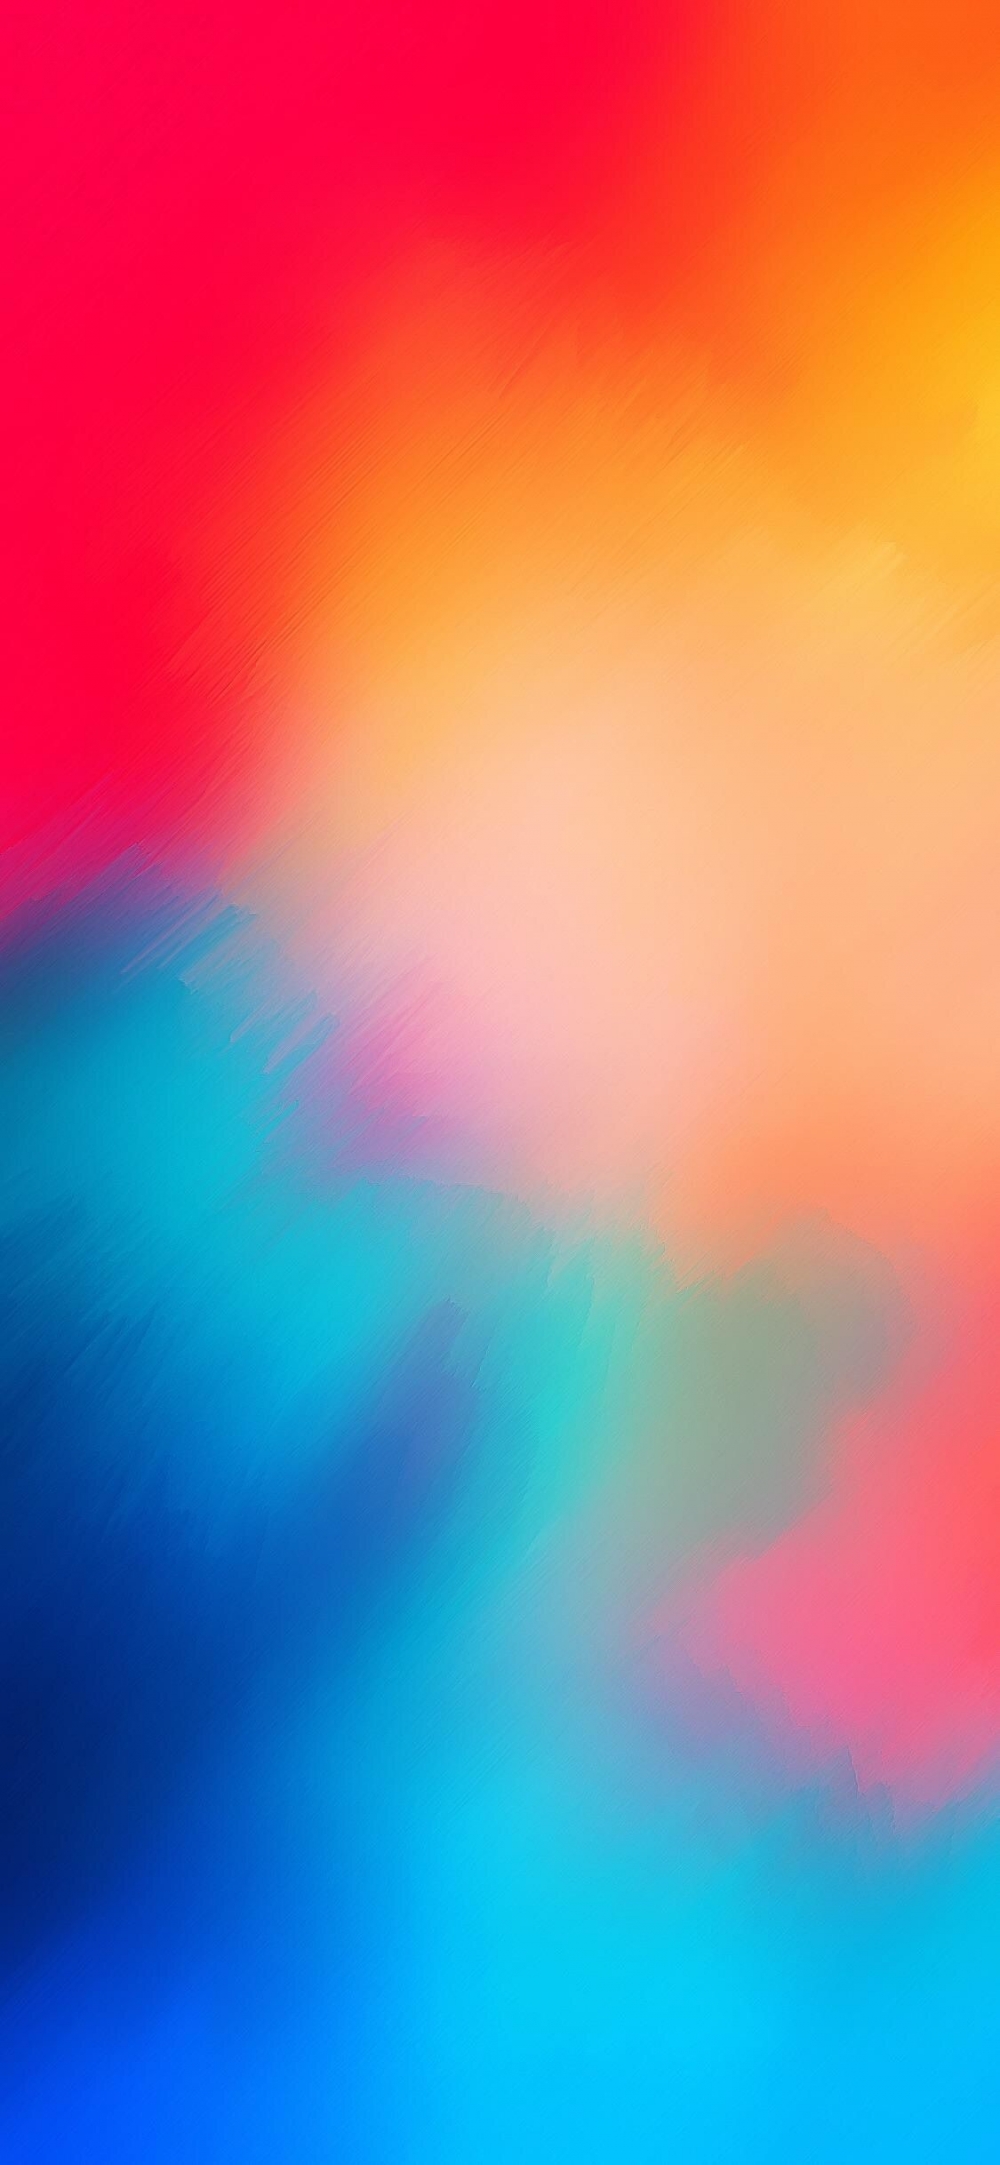 Colorful Blue Orange Yellow Gradient wallpaper for Apple iPhone, Mac, iPad and more